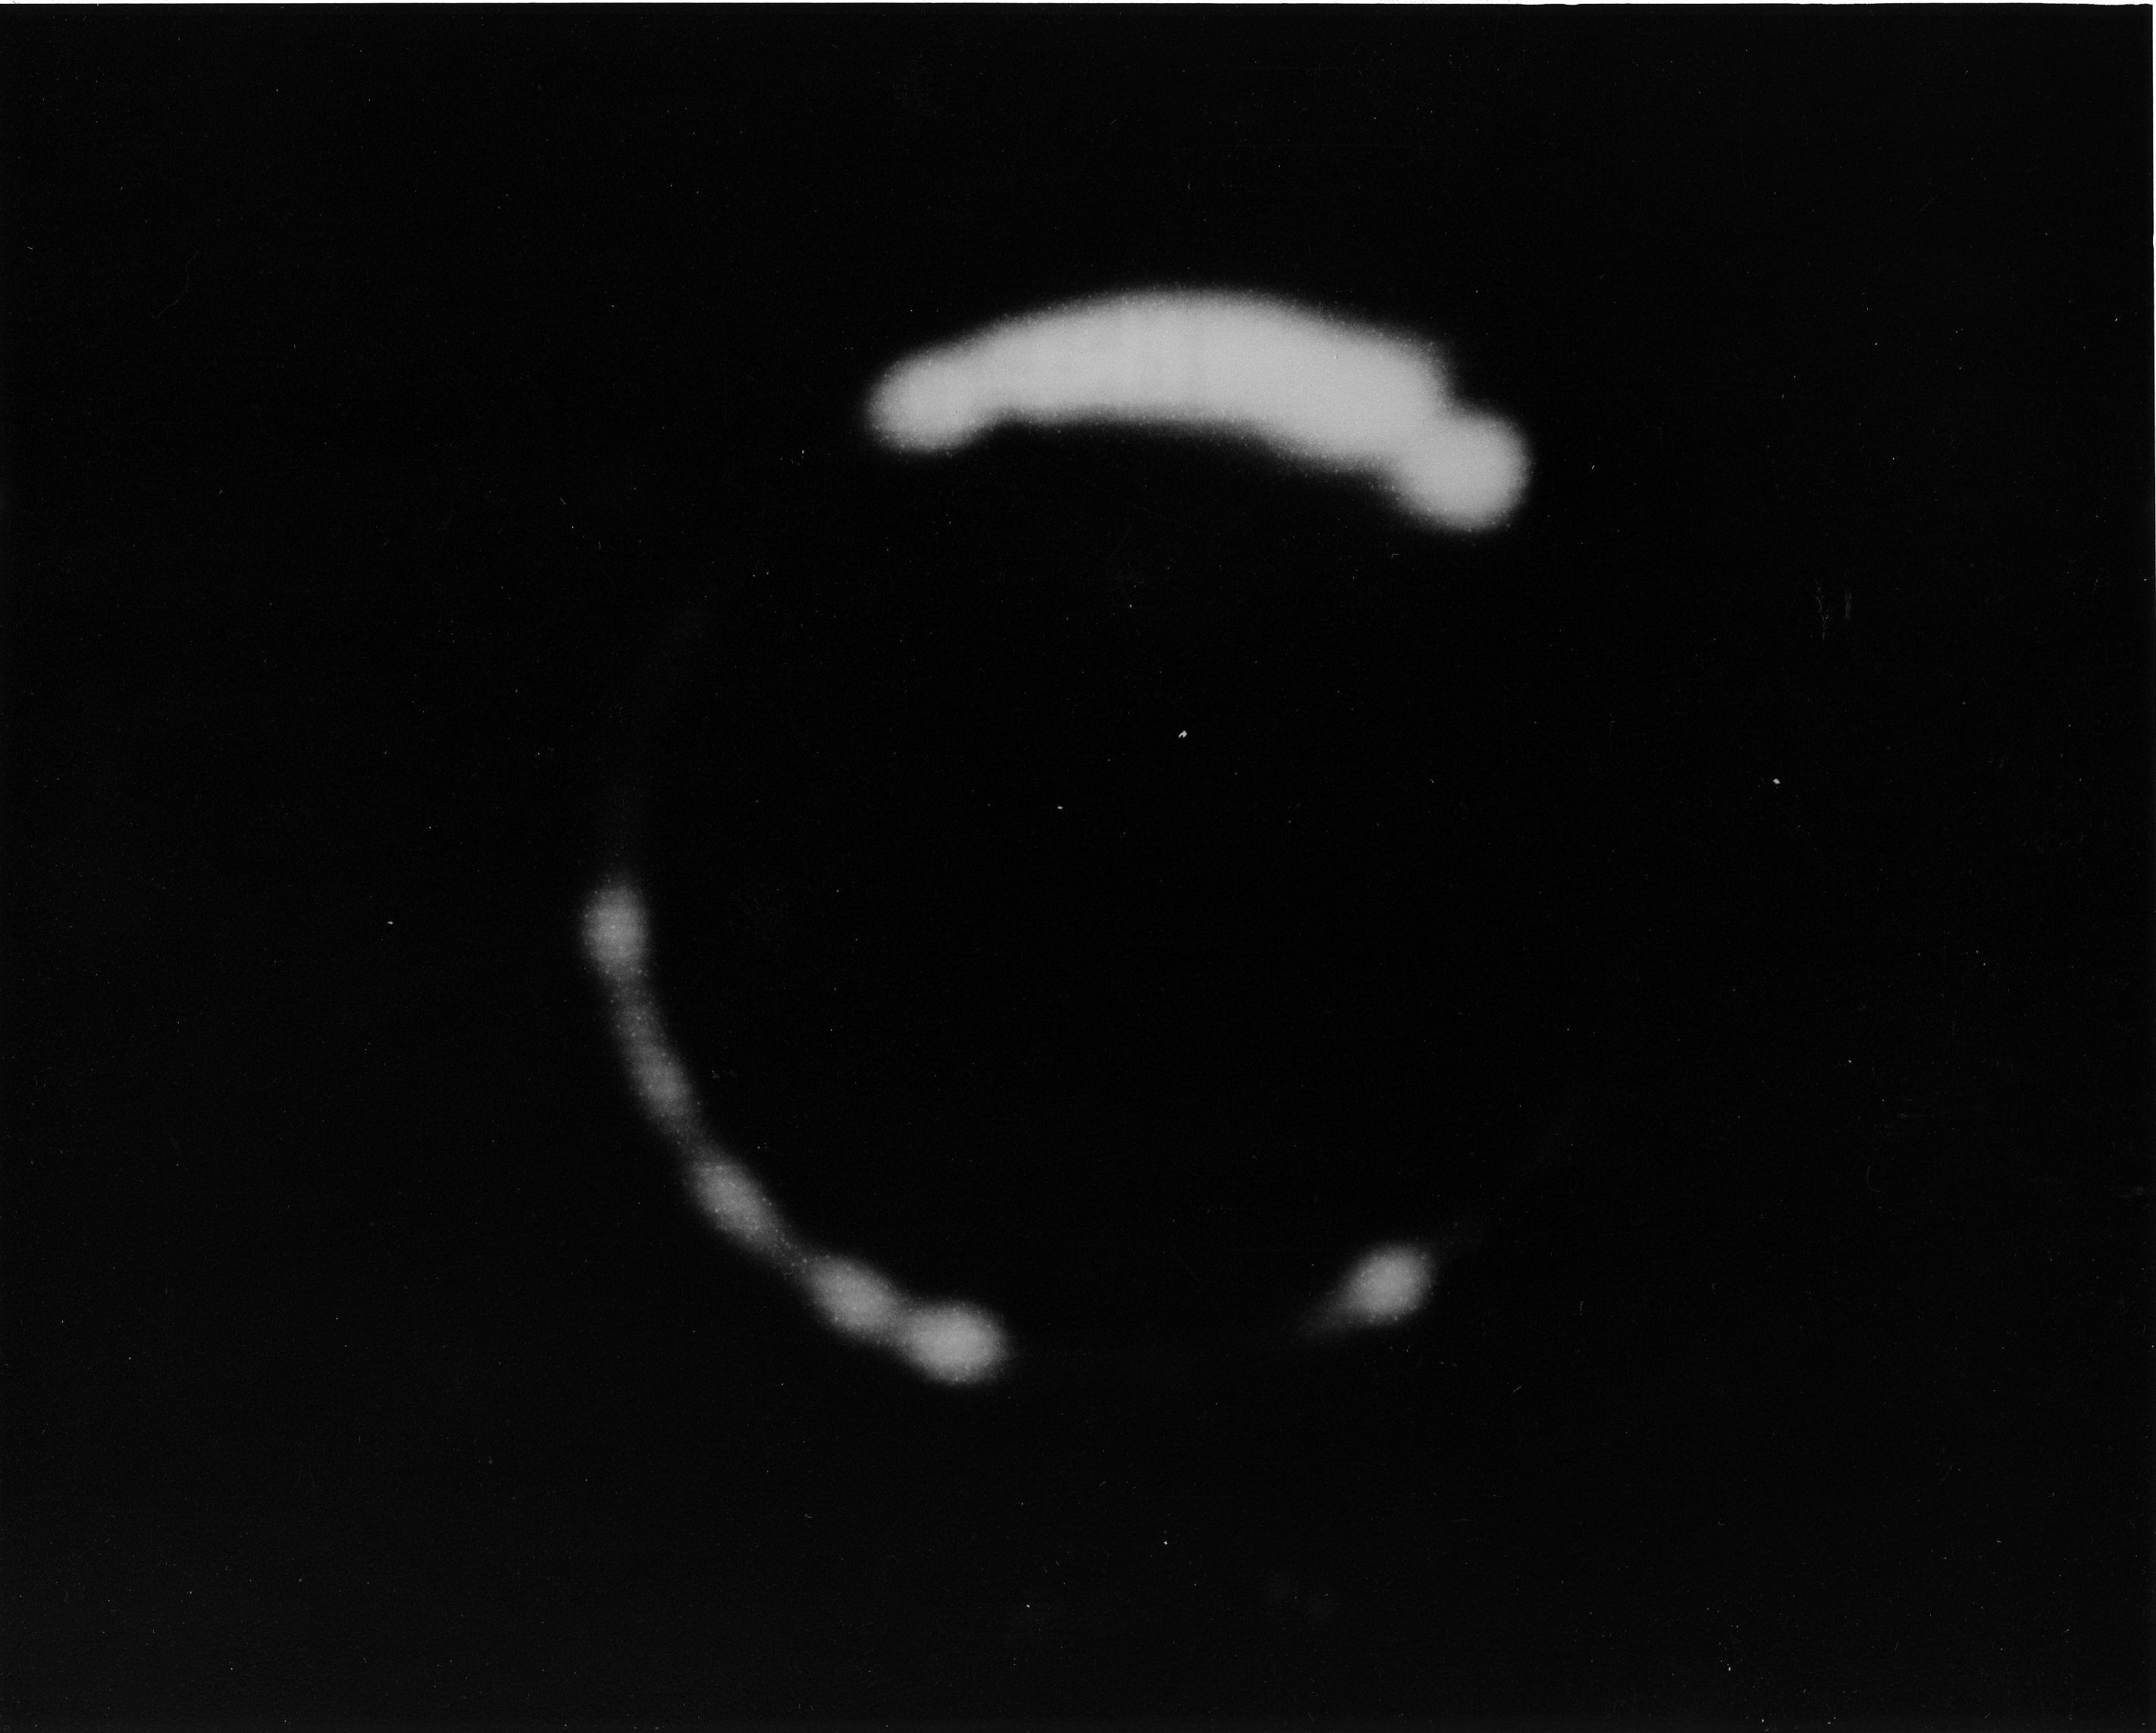 Surveyor 3 observes a solar eclipse from the Moon in April 1967